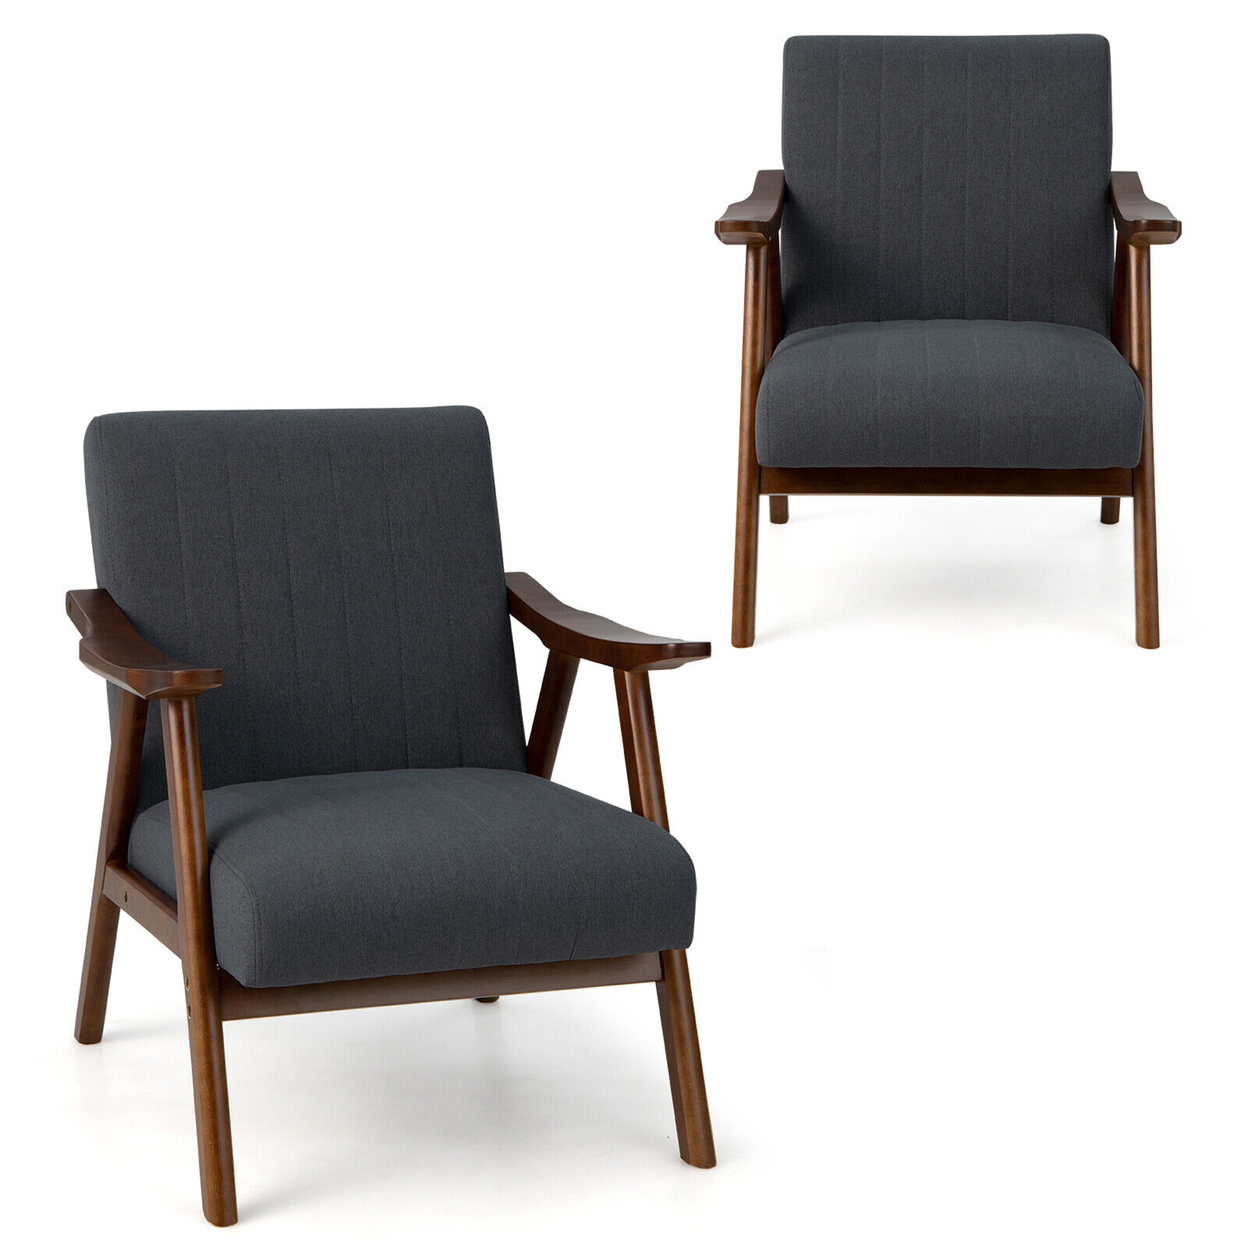 Set Of 2 Accent Chair Leathaire Leisure Armchair W/ Rubber Wood Frame & Felt Pads